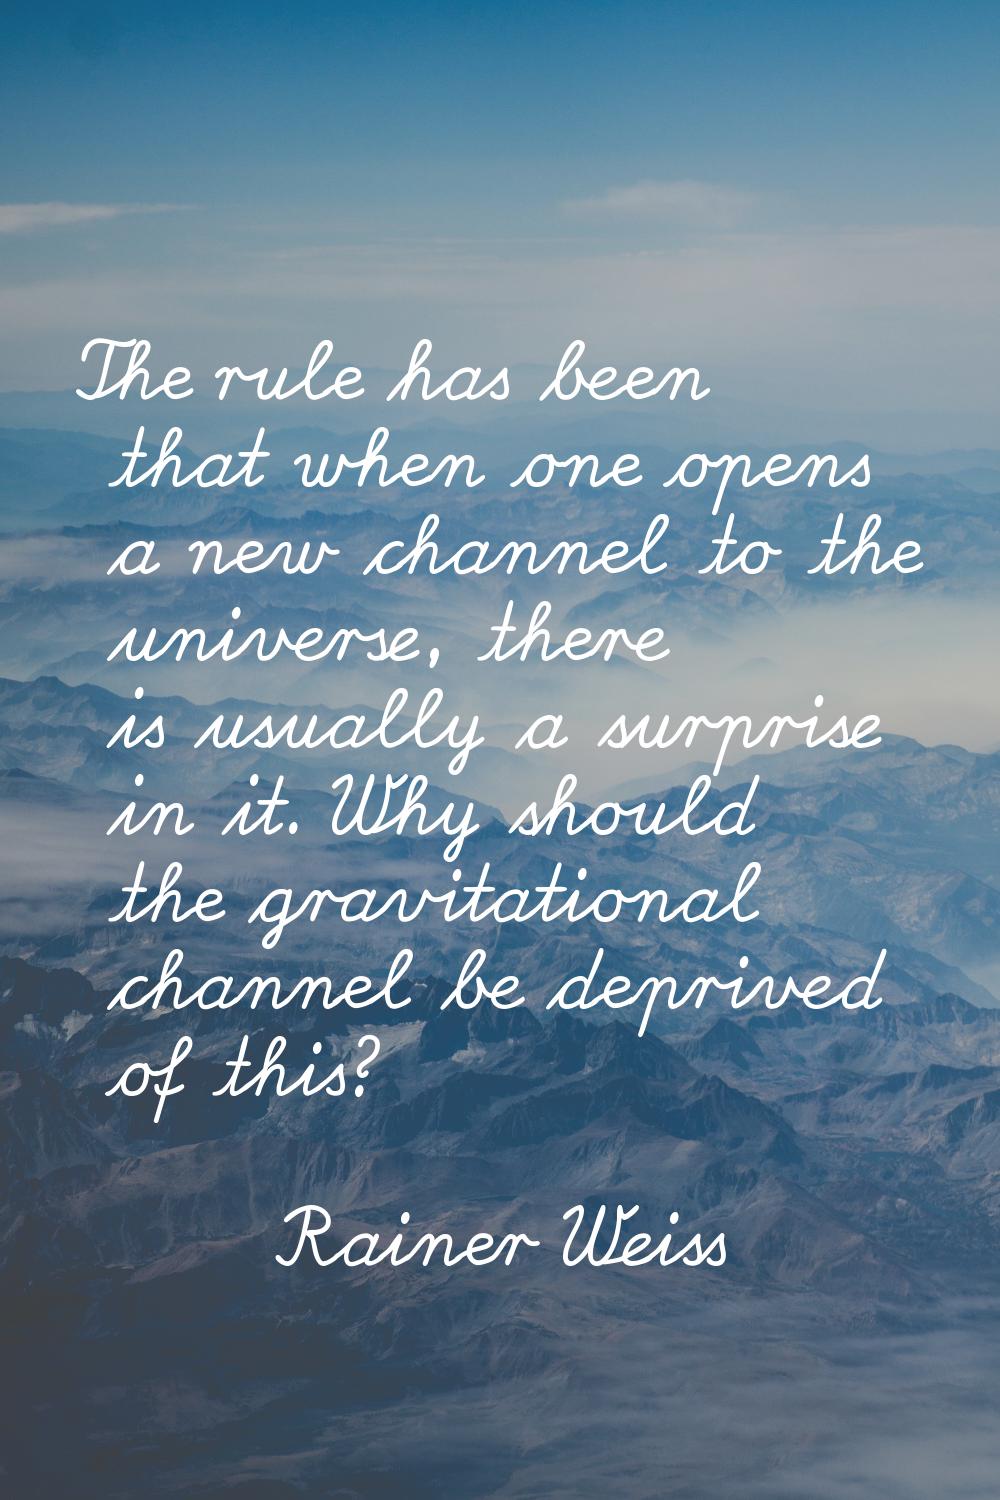 The rule has been that when one opens a new channel to the universe, there is usually a surprise in